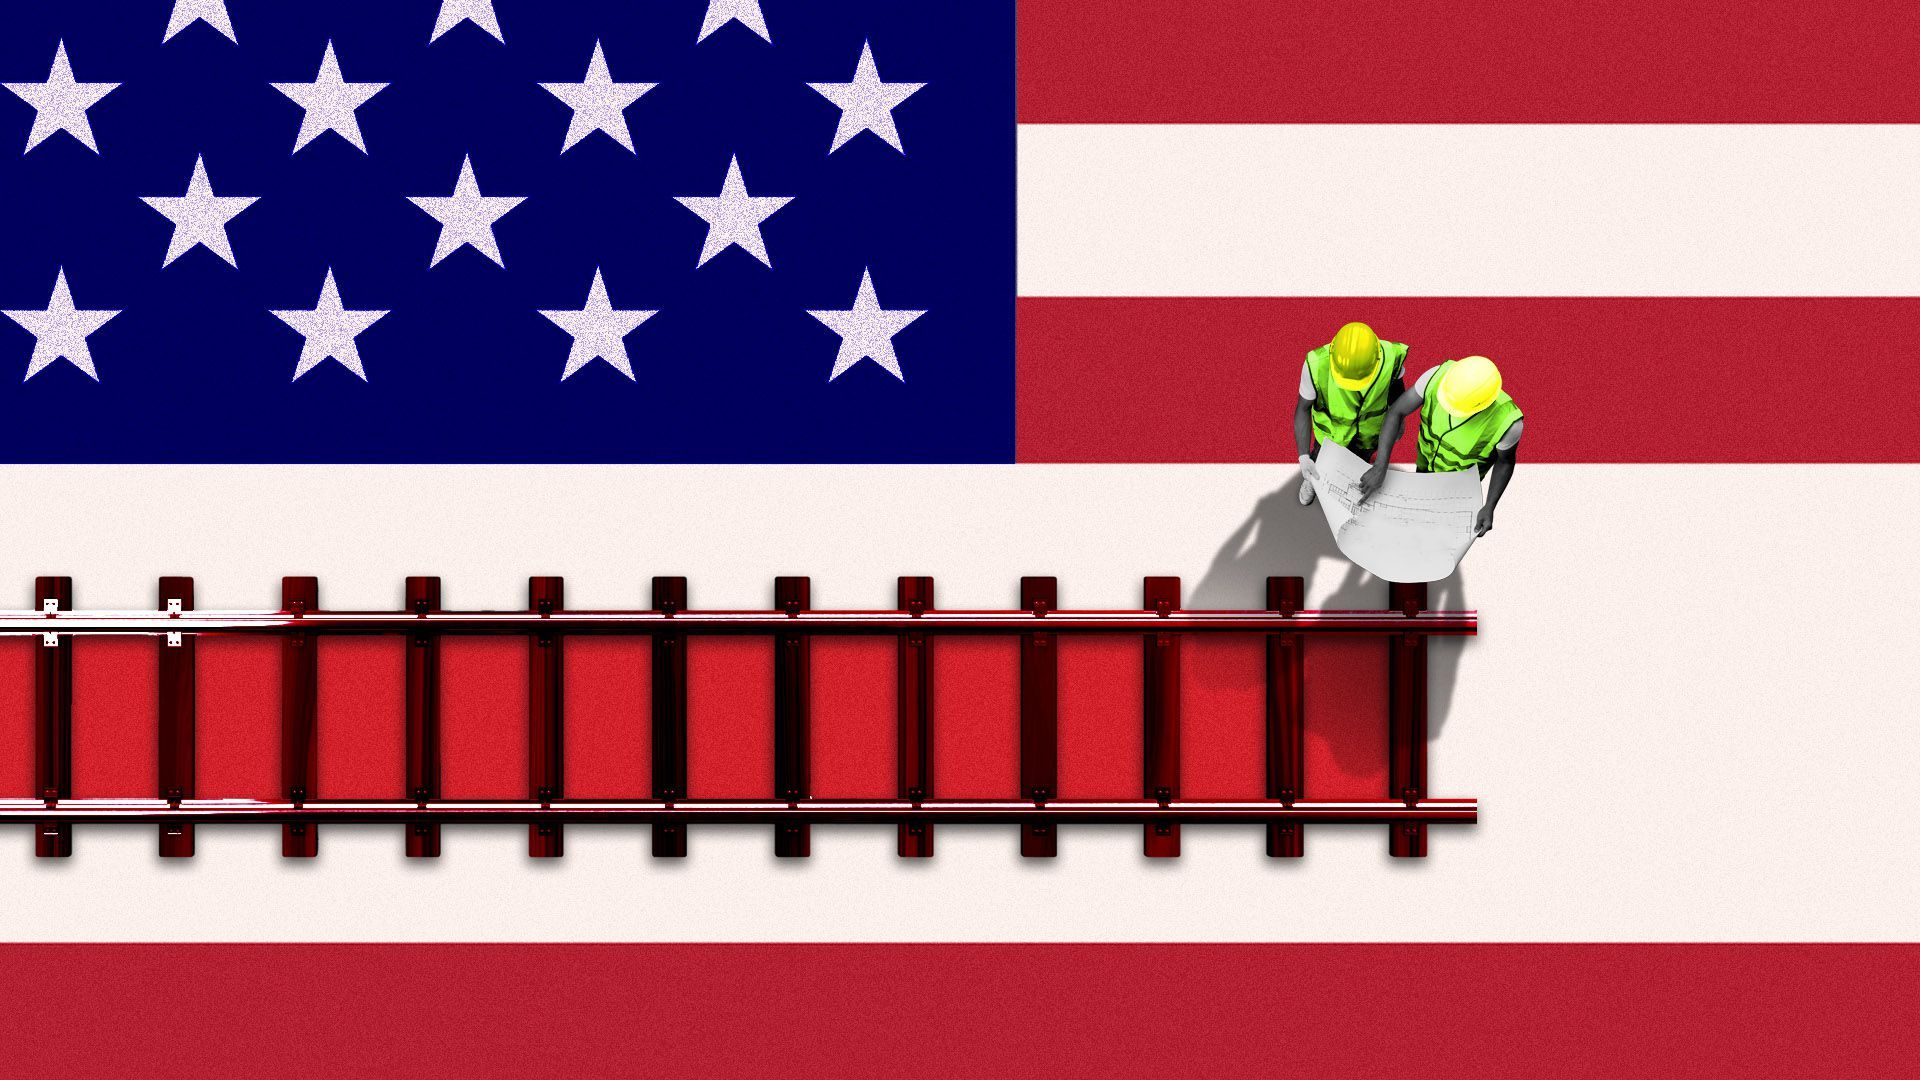 Illustration of an American flag with a railroad track being built on one of the stripes with little construction workers